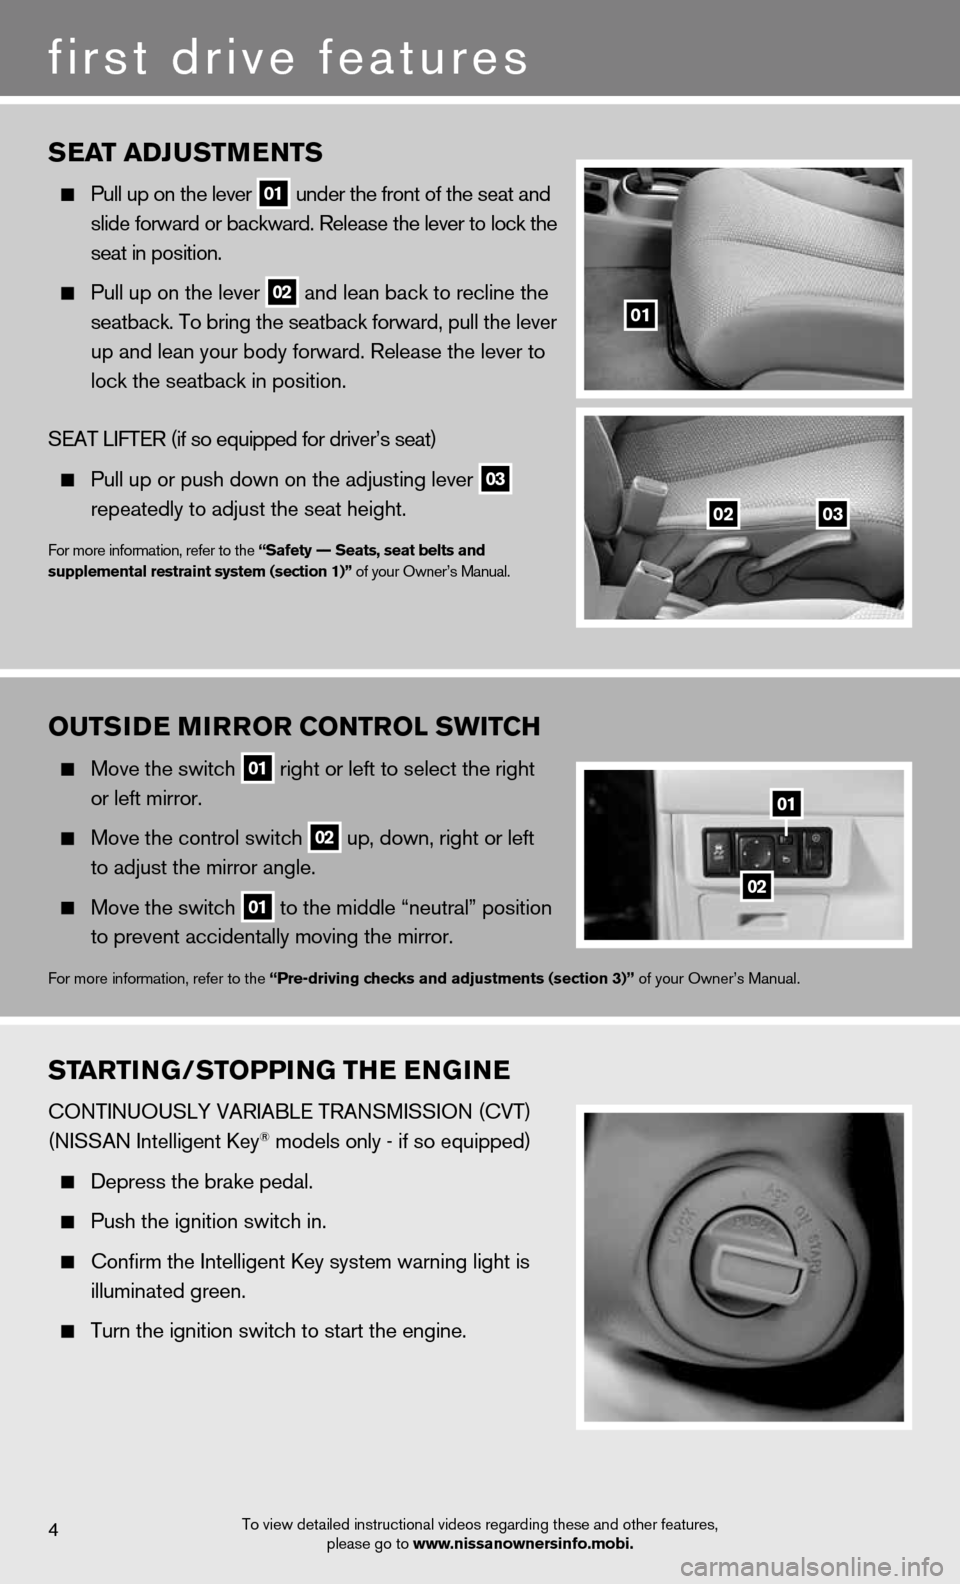 NISSAN VERSA HATCHBACK 2012 1.G Quick Reference Guide To view detailed instructional videos regarding these and other features, please go to www.nissanownersinfo.mobi.
StartinG/StoPPin G tHE EnG in E
cOntinuOuSLY VARiAbLe tRAnSMiSSiOn (cVt) 
(niSSAn inte